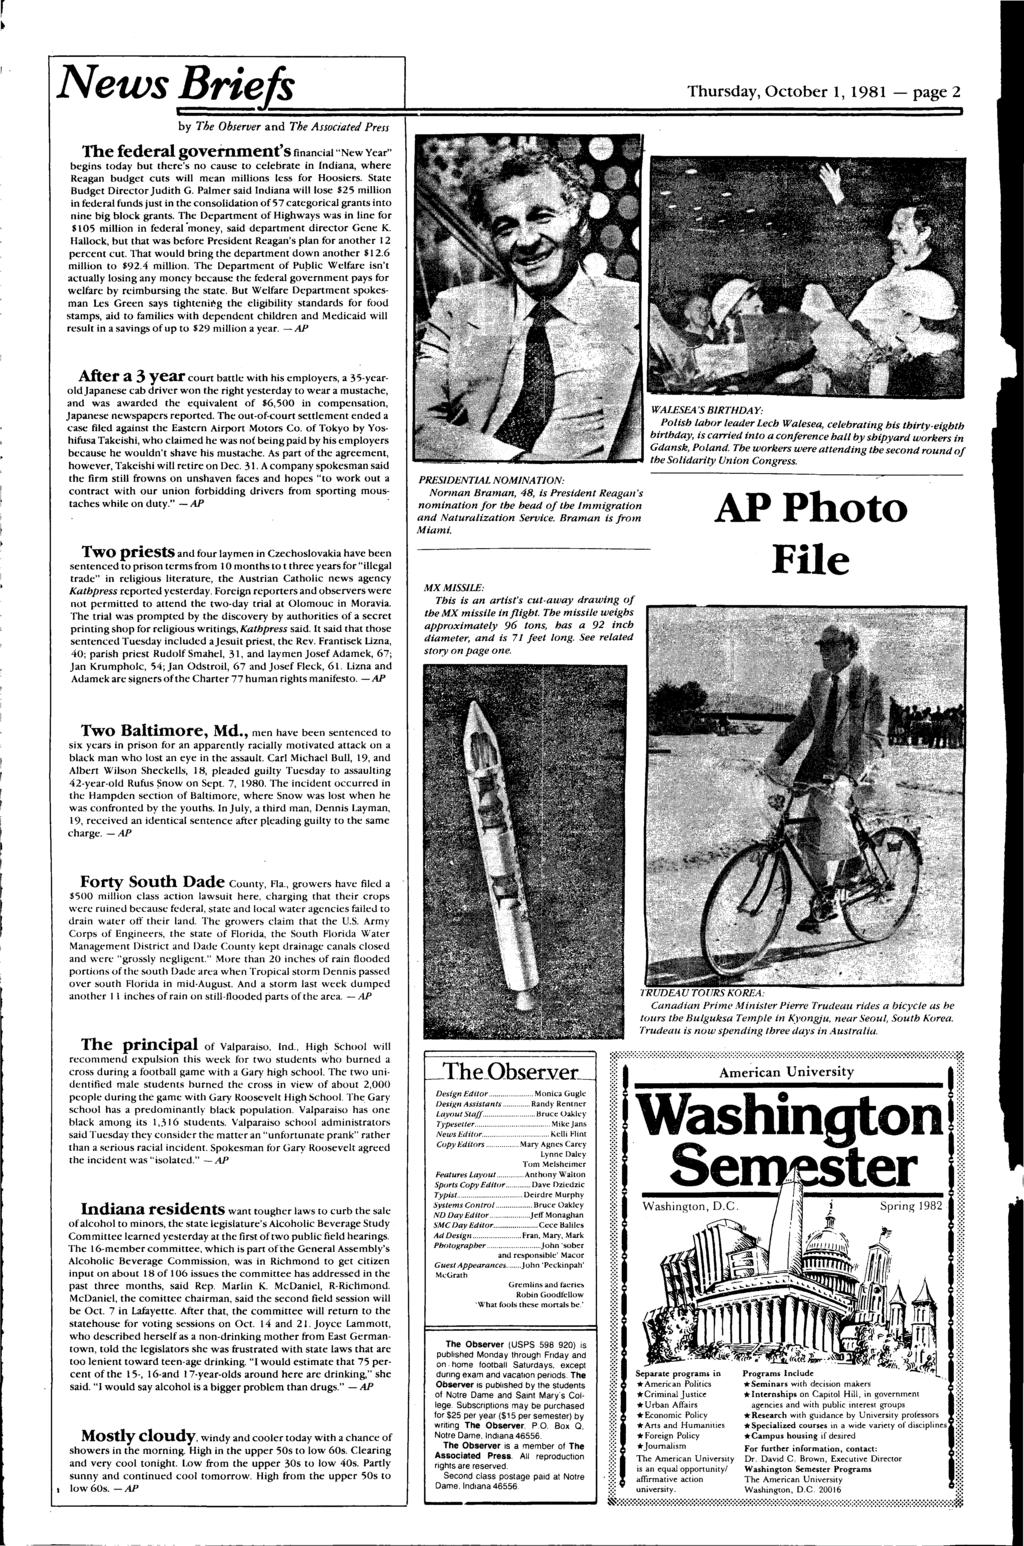 News Brie/ by The Observer and The Associaed Press Thursday, Ocober 1, 1981 -page 2 The federal govein.